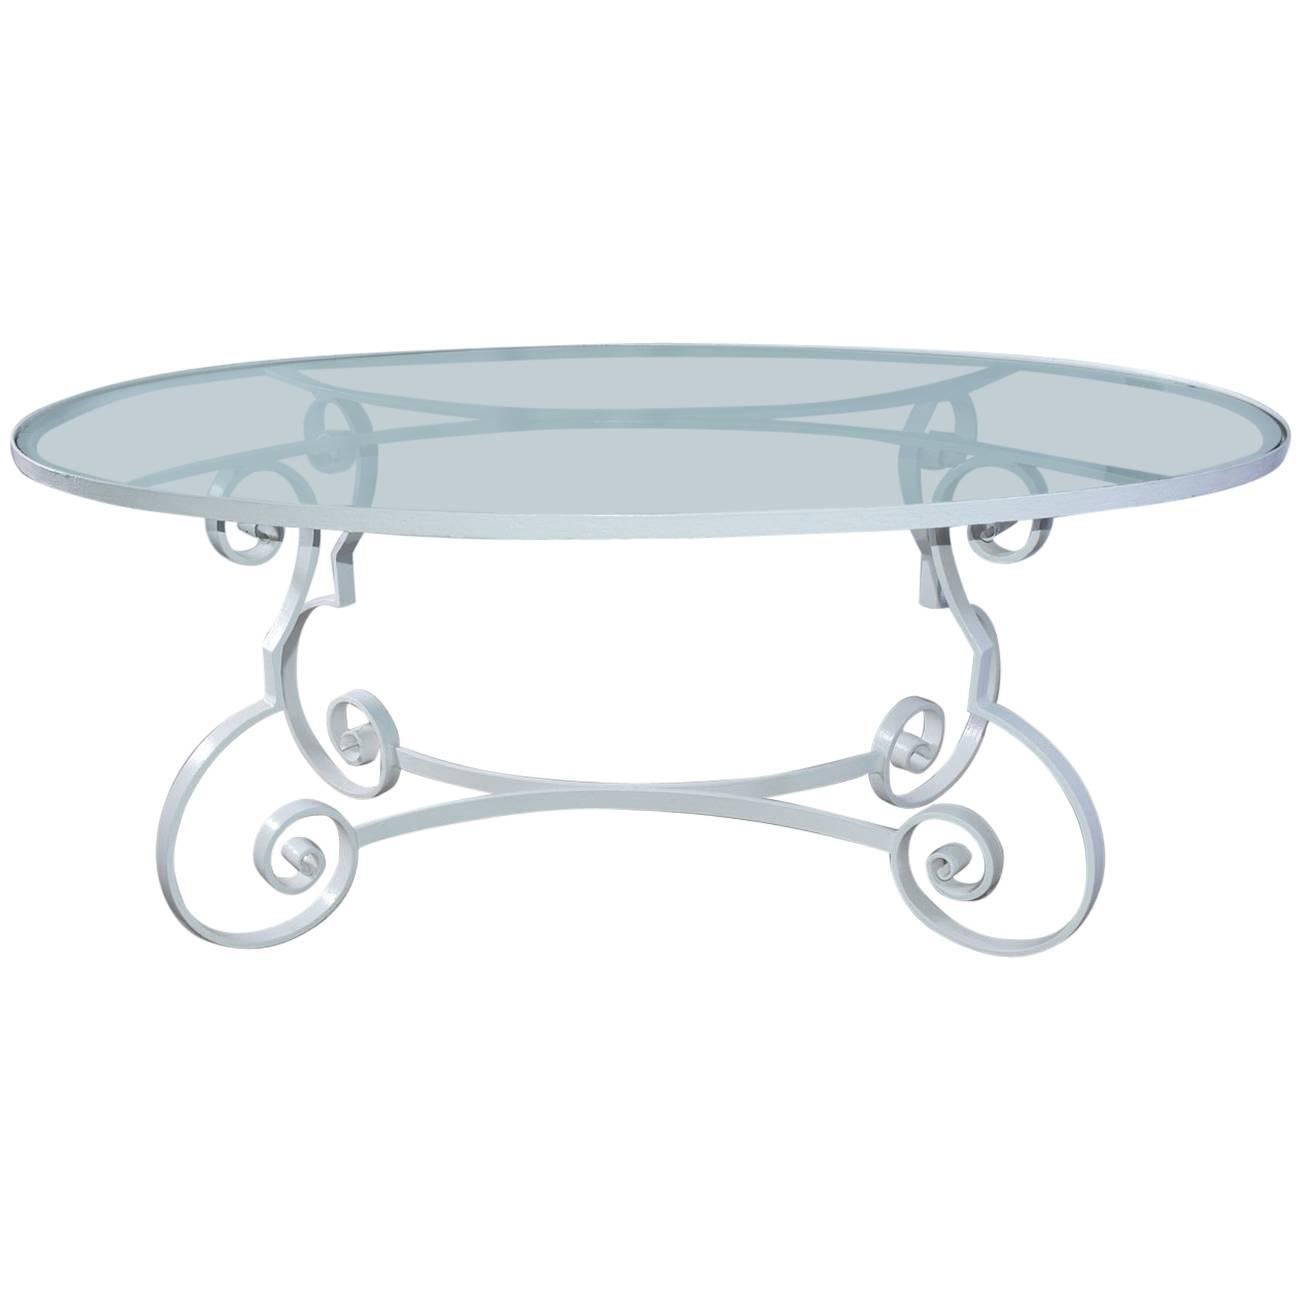 Oval Metal and Glass Midcentury Patio/Porch Garden Dining Table